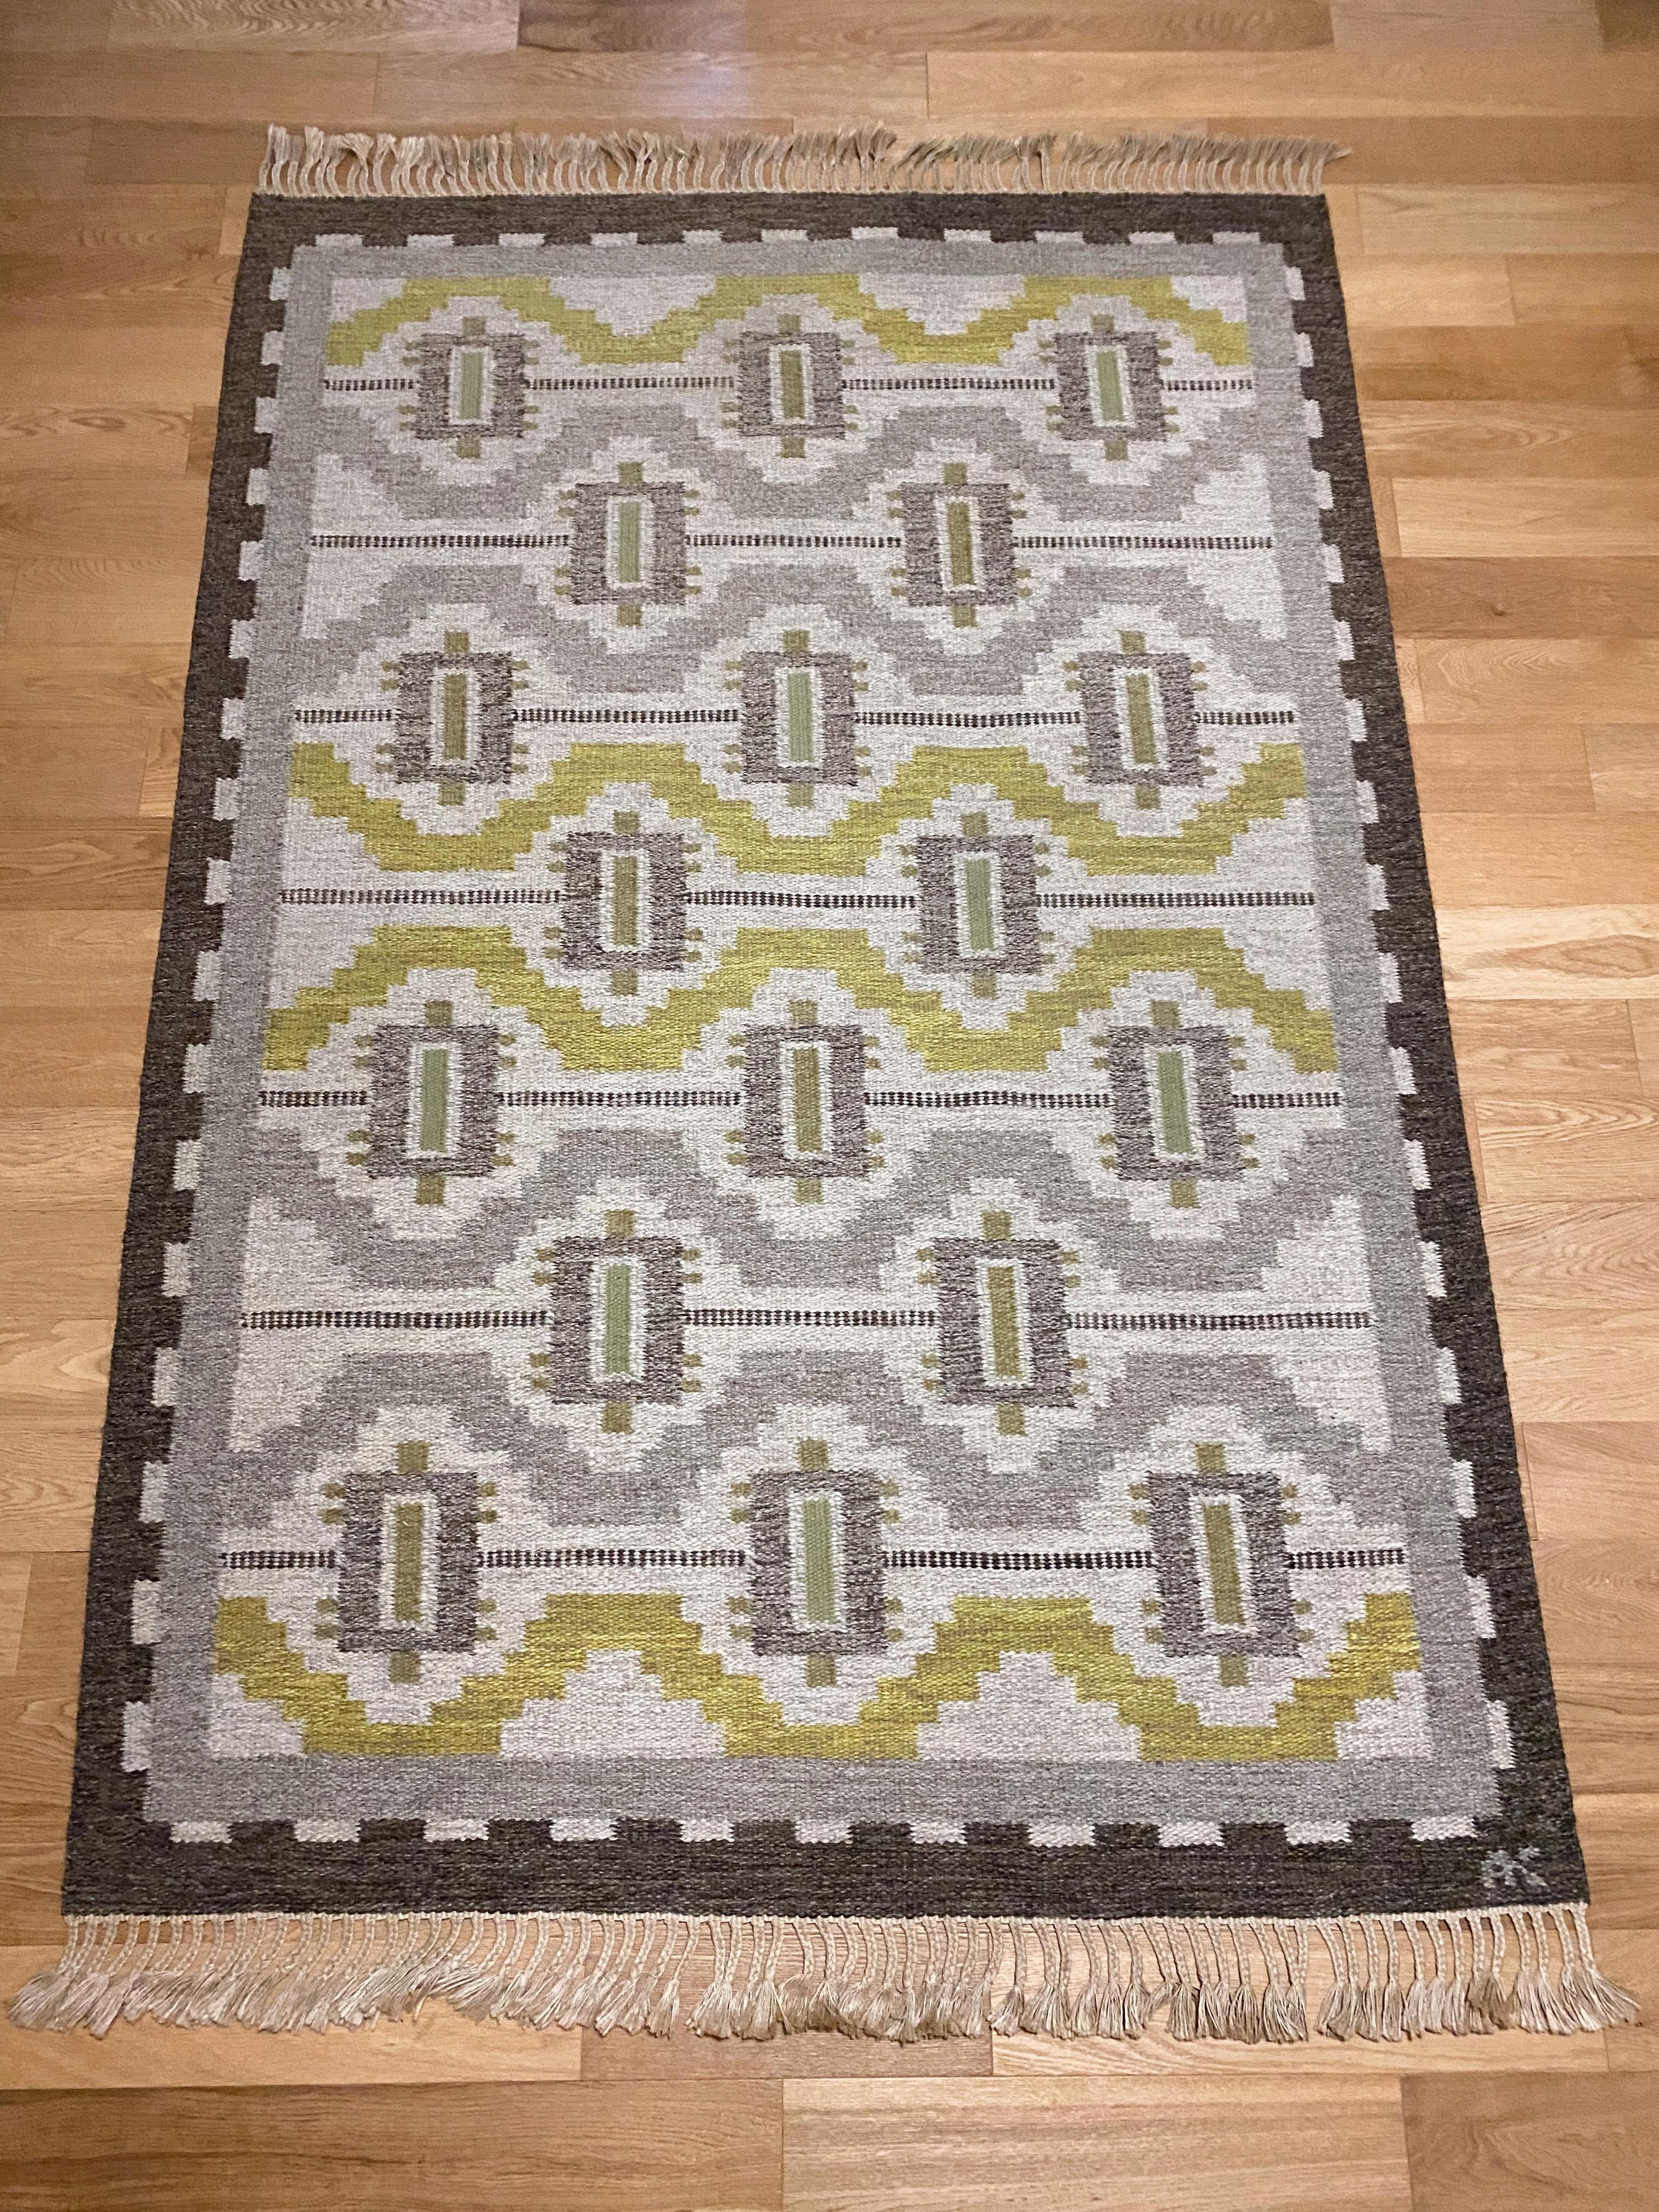 Stunning vintage Swedish rug by Aina Kånge. Geometric design in the greek revival spirit like many of Aina Kånges rugs. Grey, yellow, green and charcoal colors. No signs of wear and in a very good condition with all fringes intact.

Country: